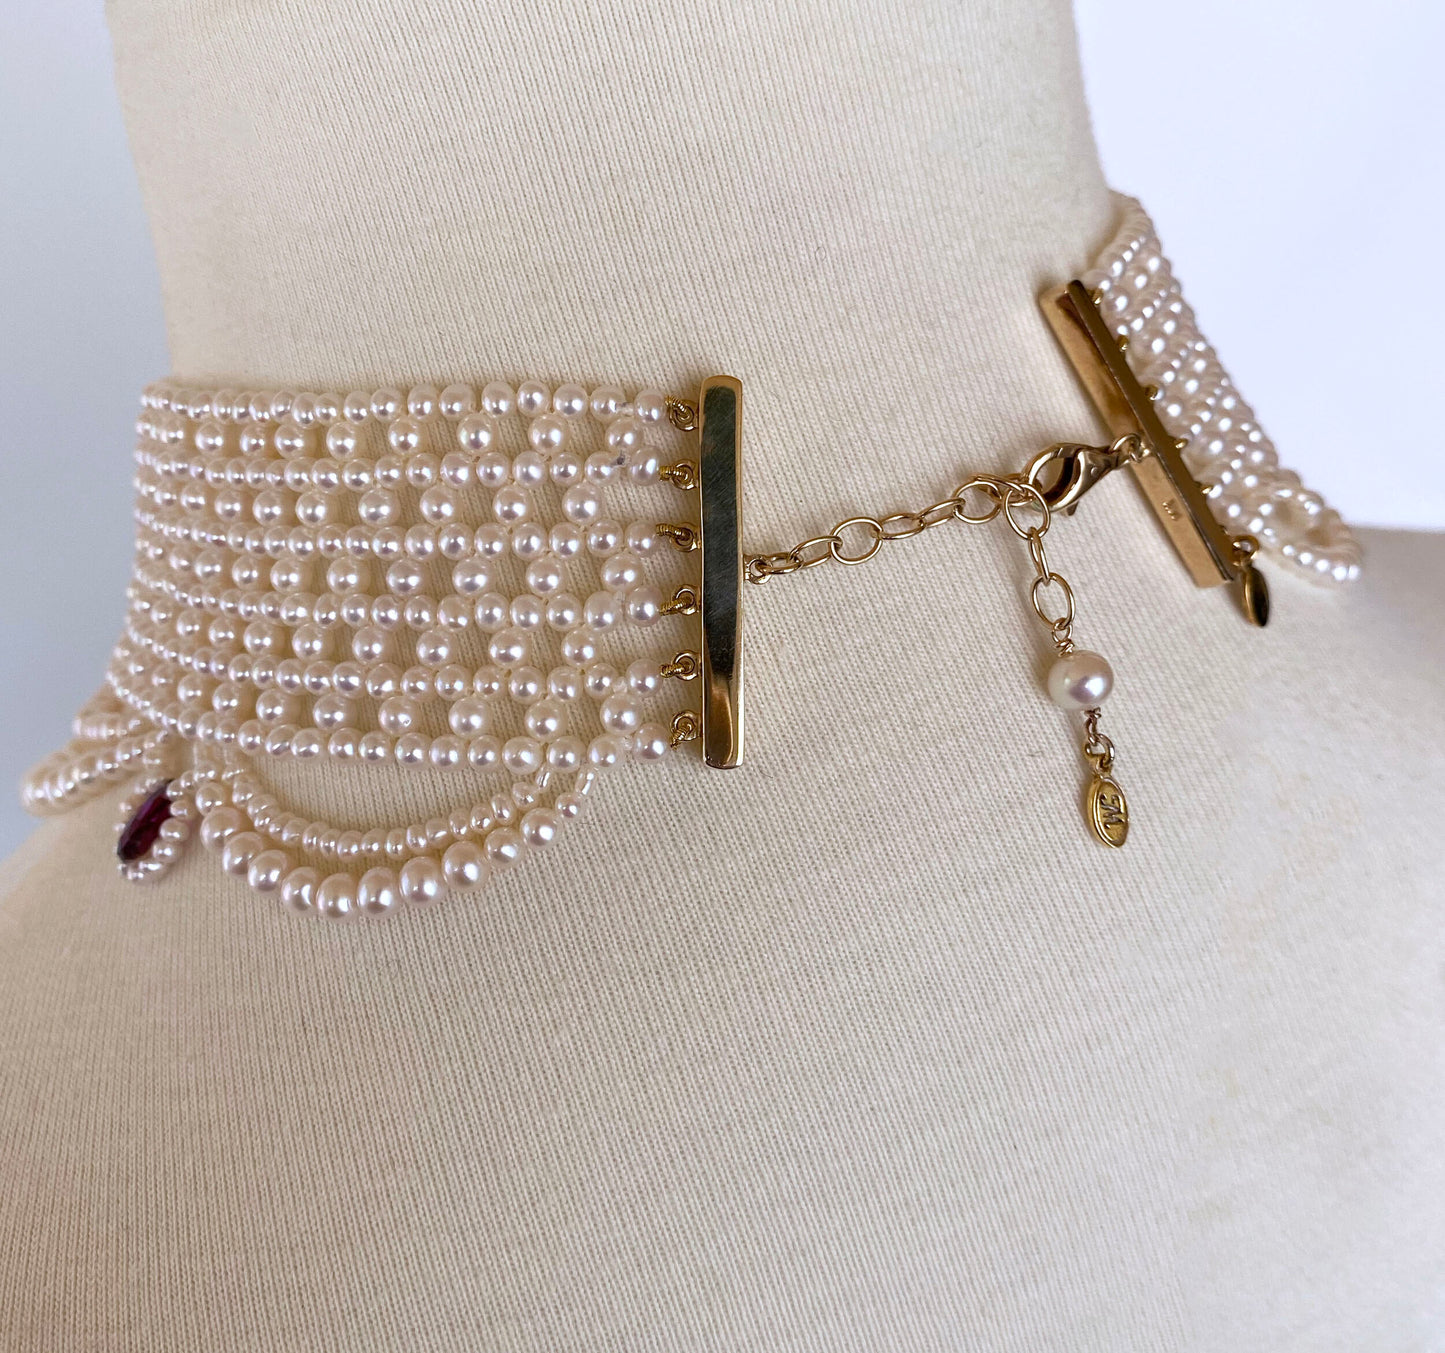 Woven Pearl Choker with Pearl Drapes, Garnet Briolettes and 14 K Gold